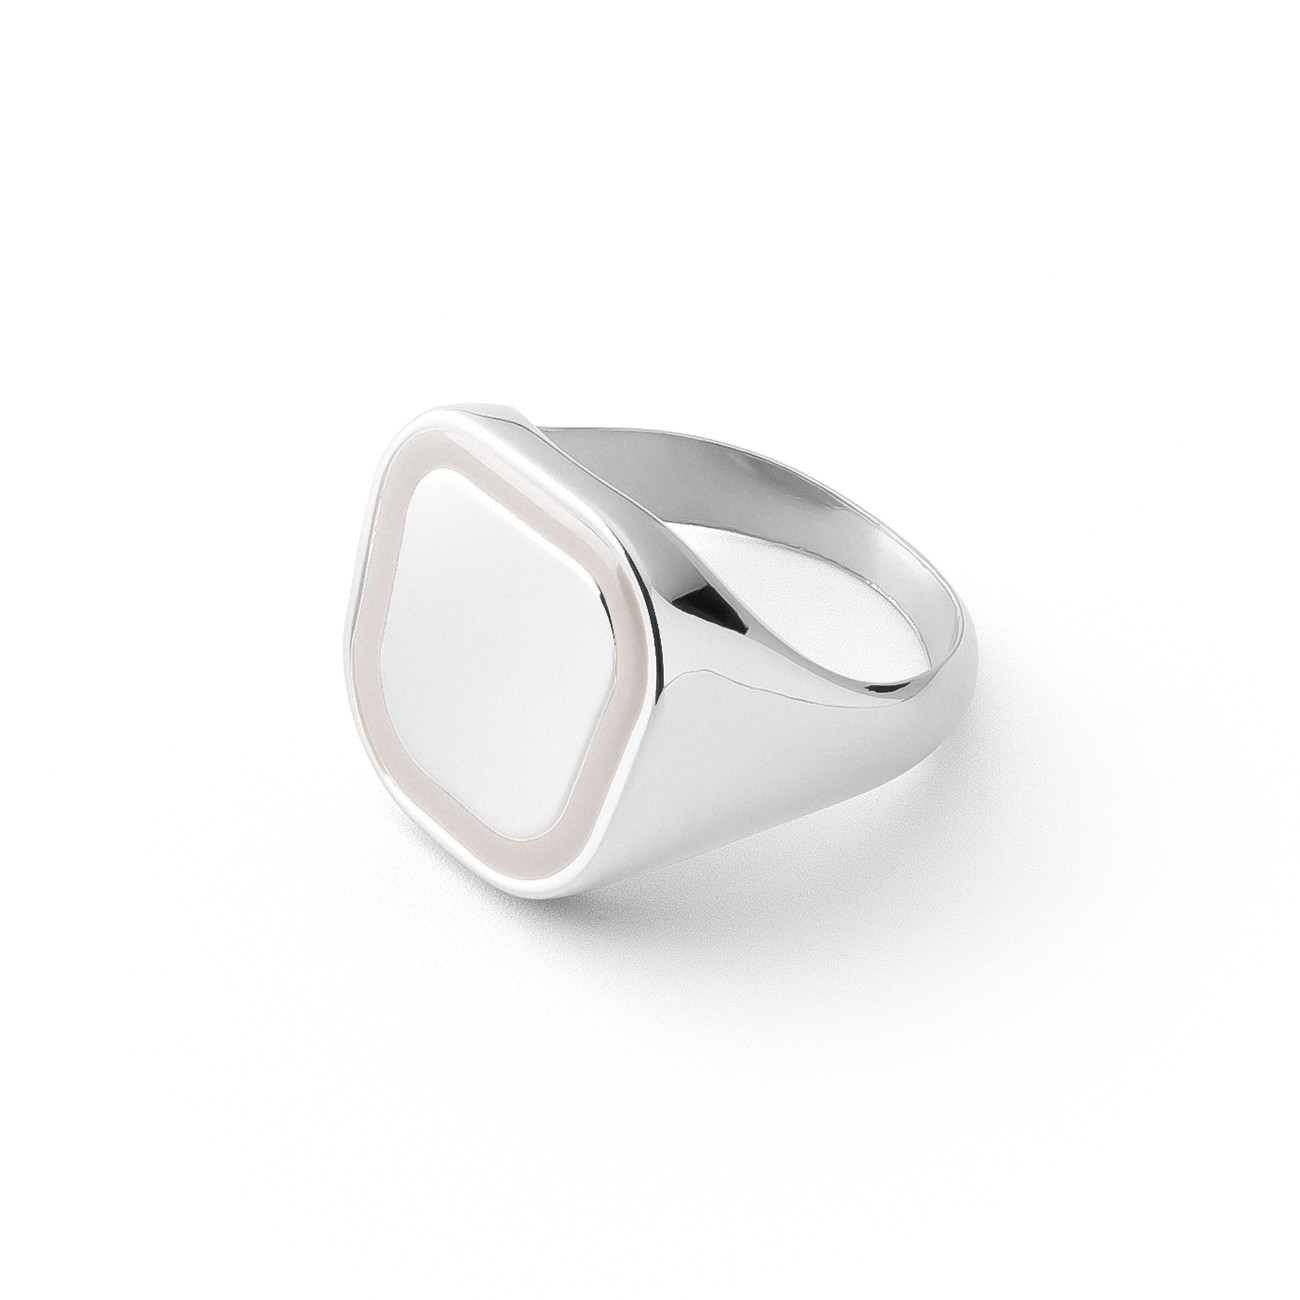 Square signet ring with white resin, sterling silver 925